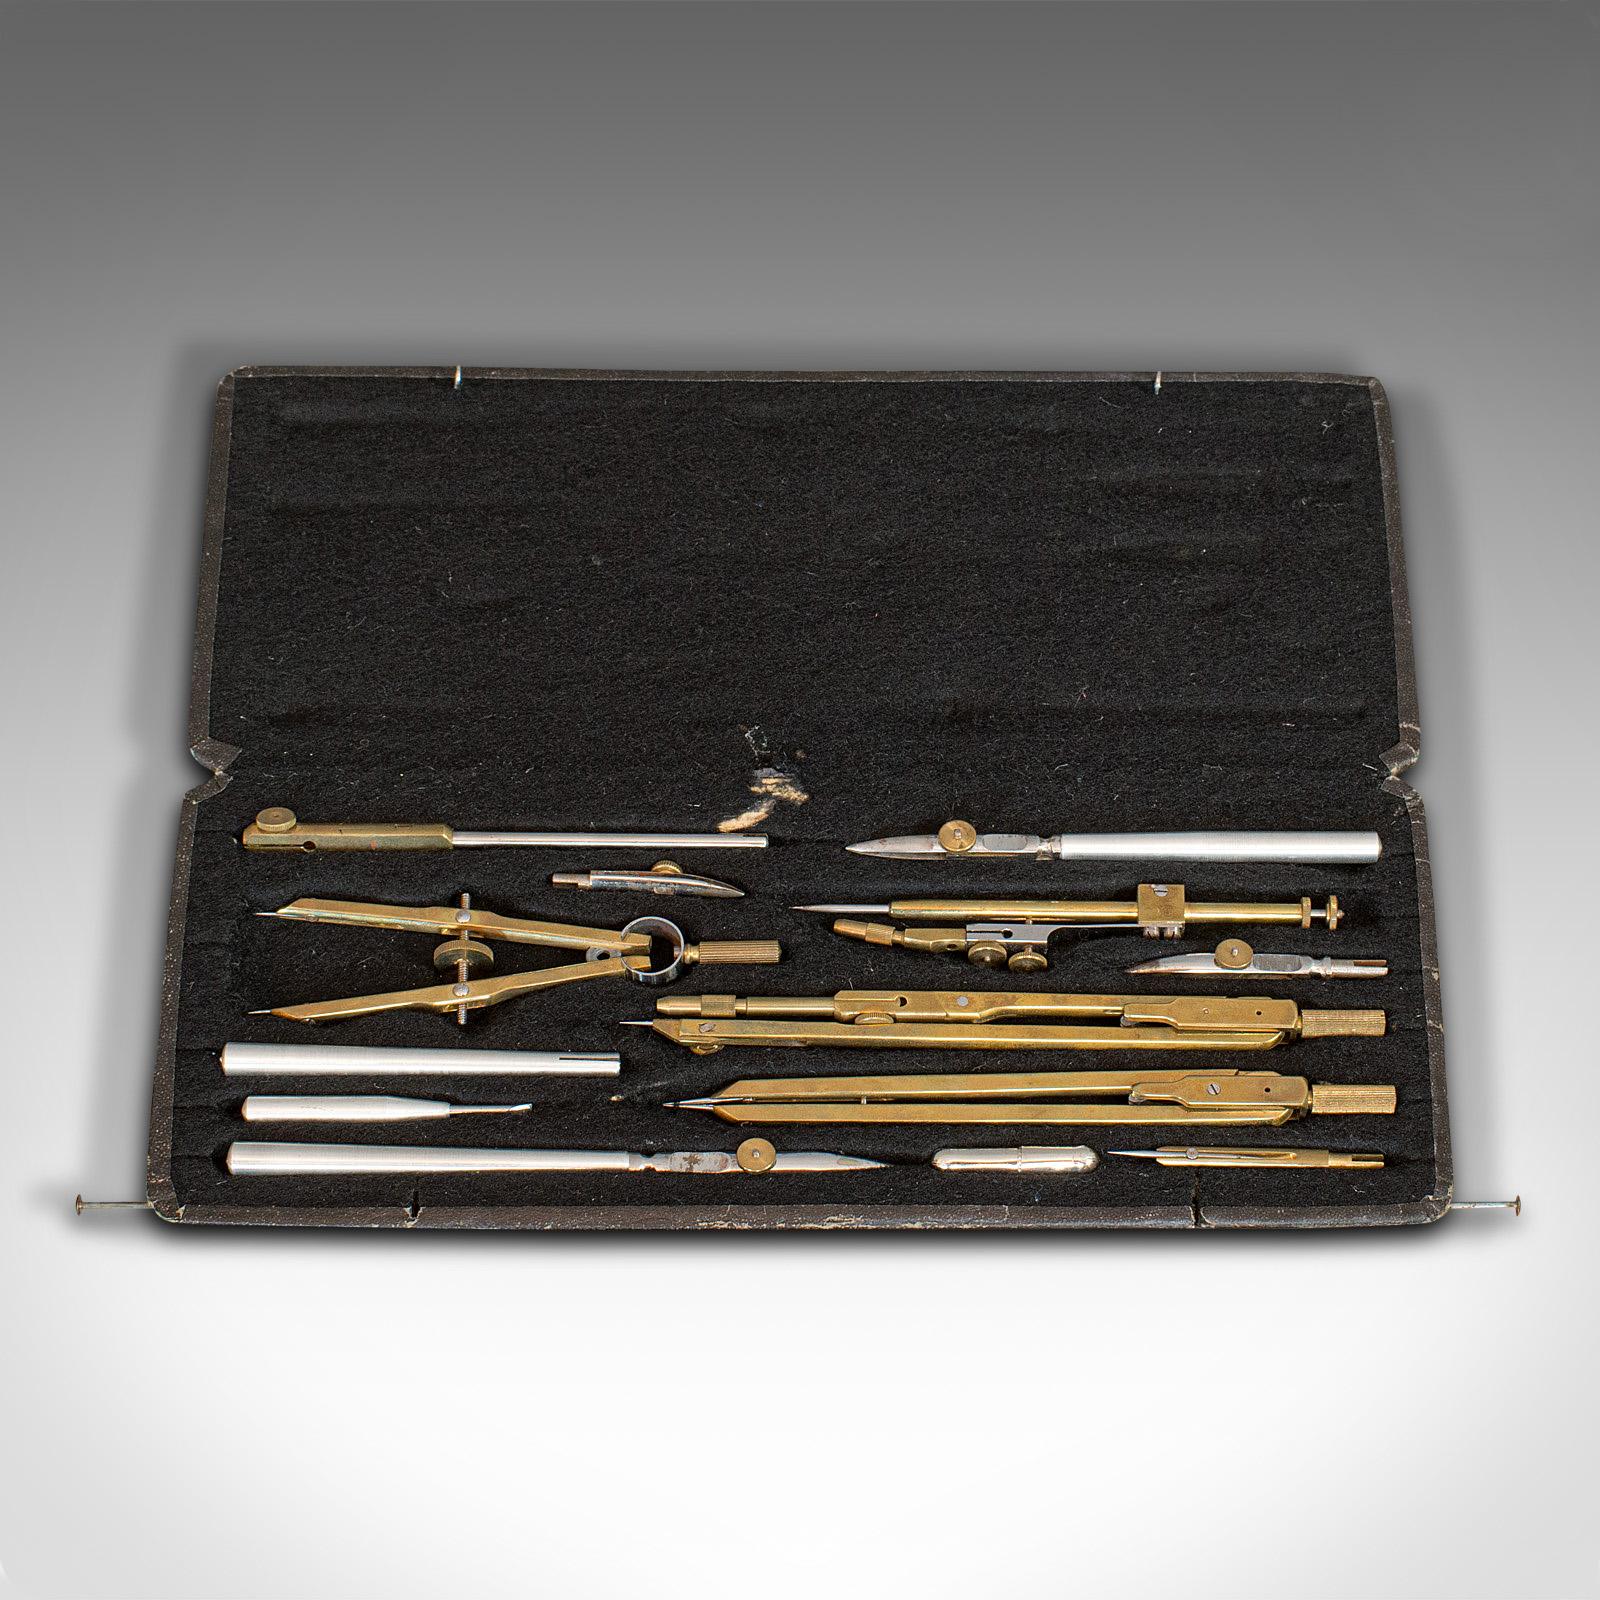 This is an antique drawing instrument set. A German, brass cartographer's or architect's technical drawing set, by Richter, dating to the Edwardian period, circa 1910.

Nicely presented set of instruments
Displays a desirable aged patina
Brass